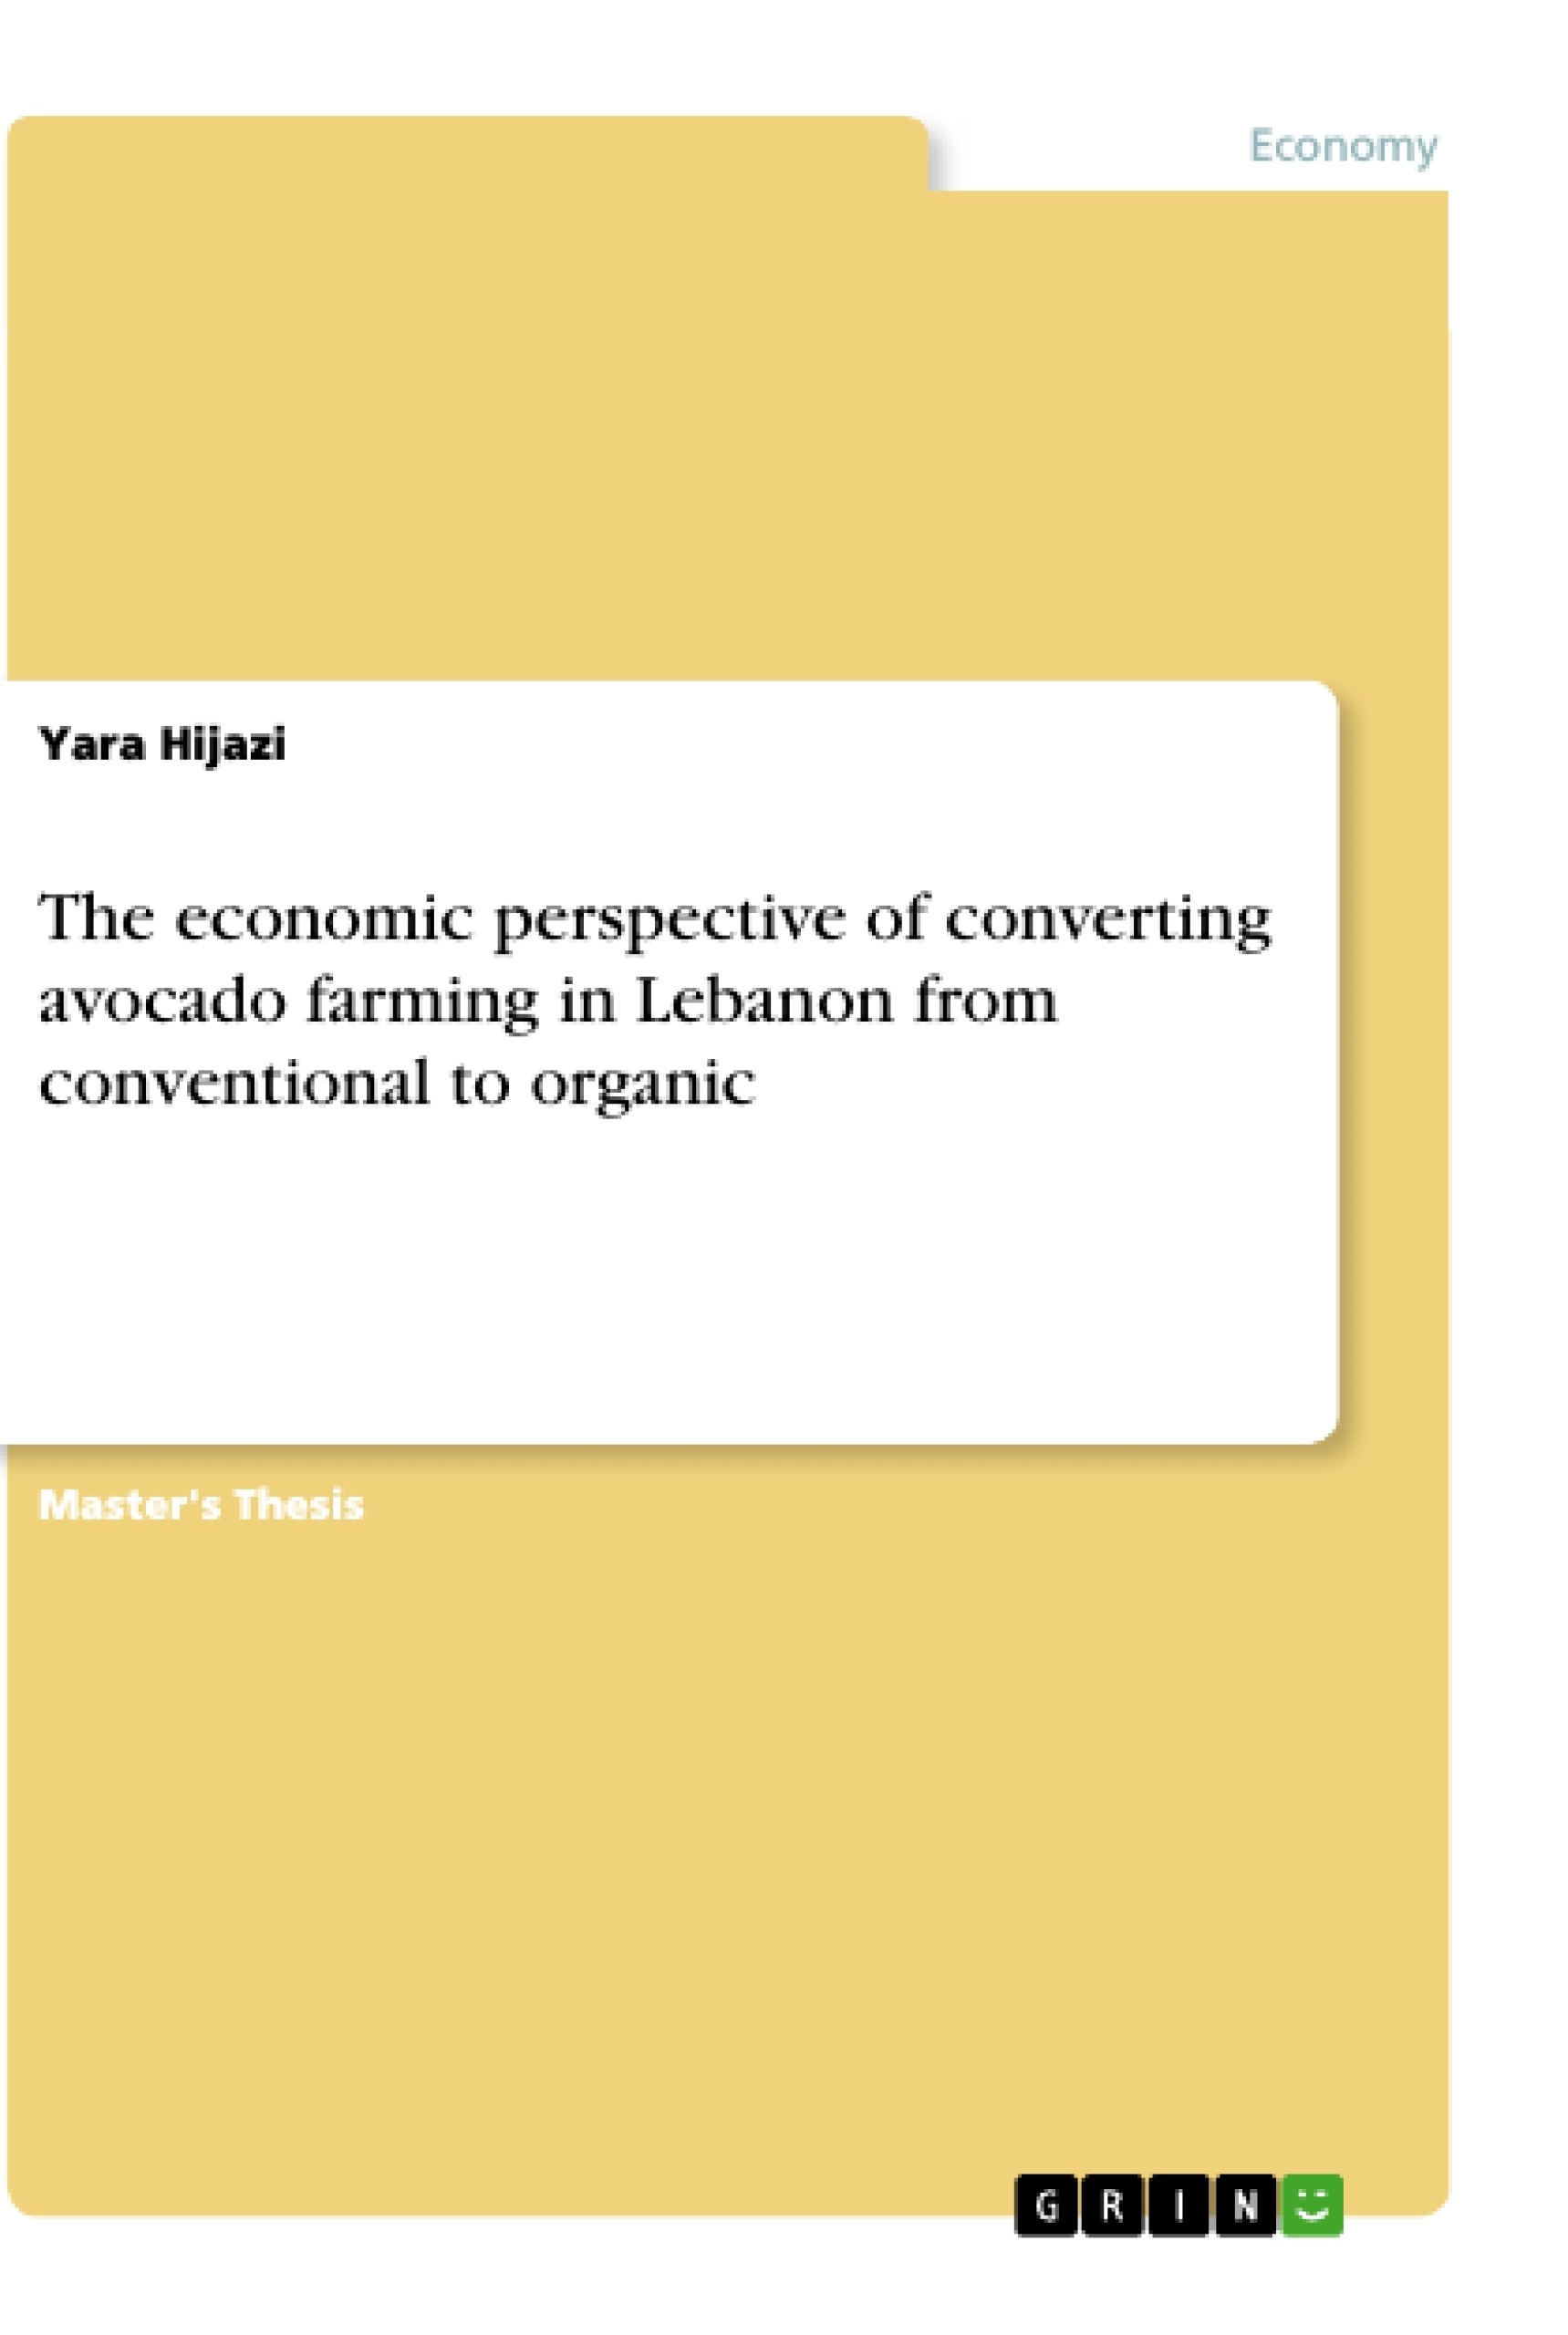 Title: The economic perspective of converting avocado farming in Lebanon from conventional to organic